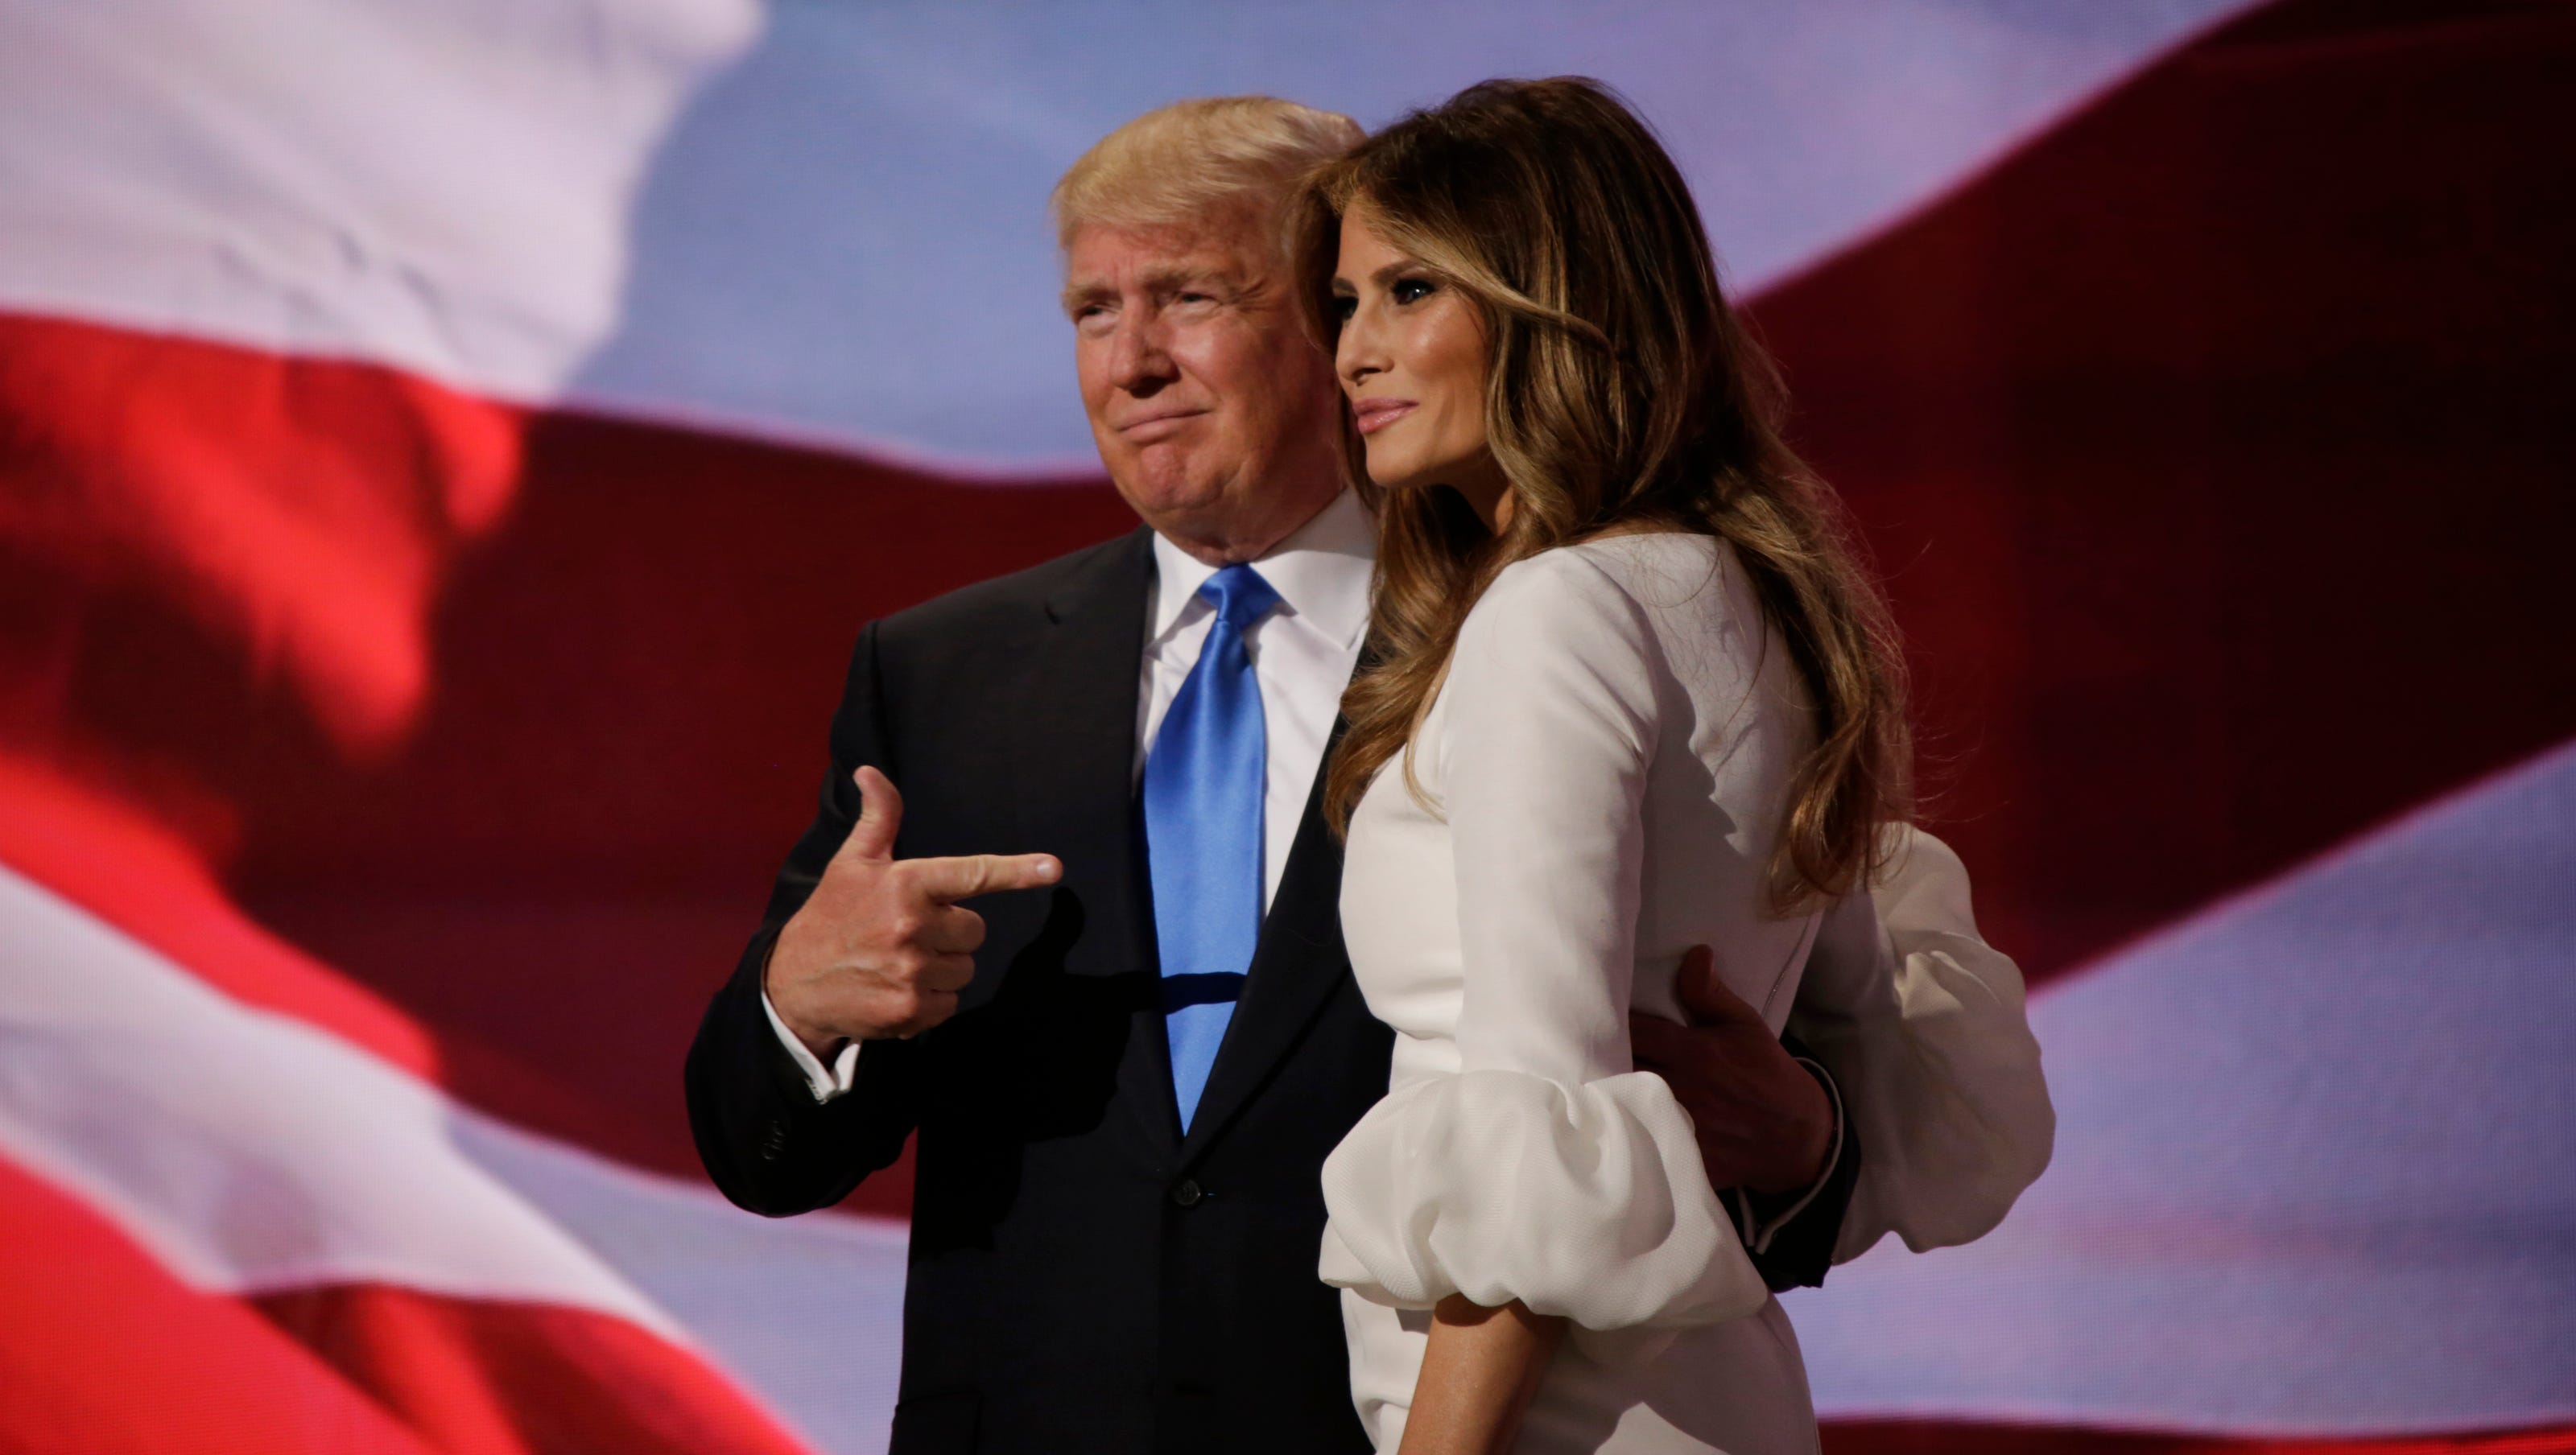 Trump Introduces Wife Melania To National Audience Predicts Victory